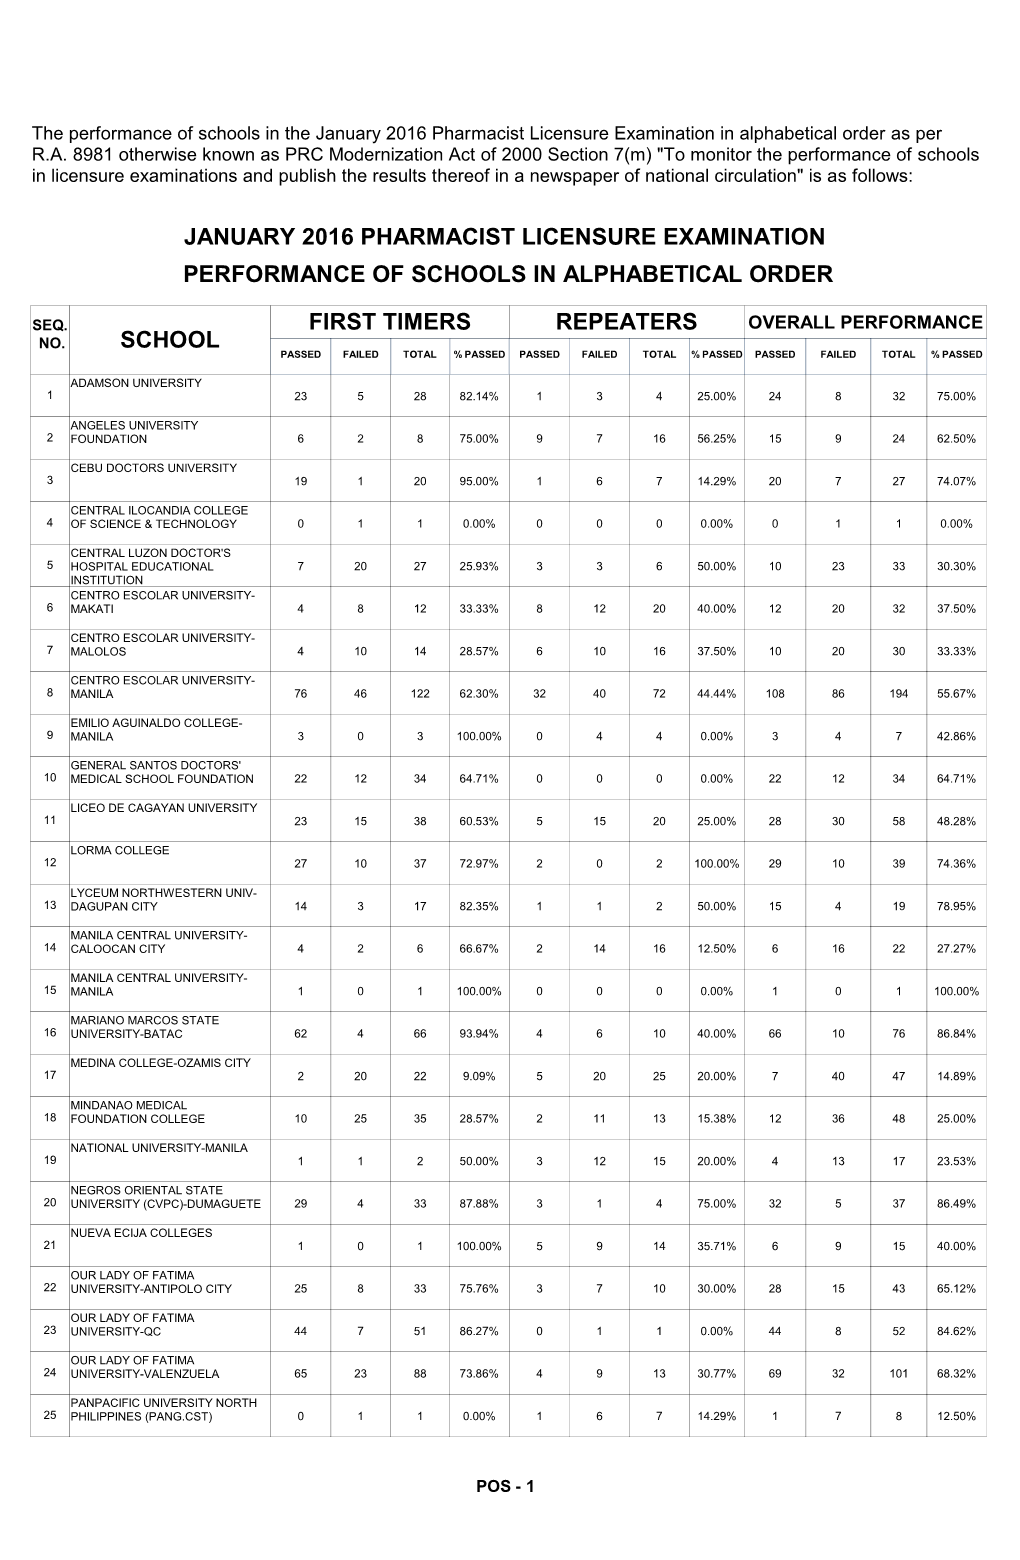 Performance of Schools in the January 2016 Pharmacist Licensure Examination in Alphabetical Order As Per R.A